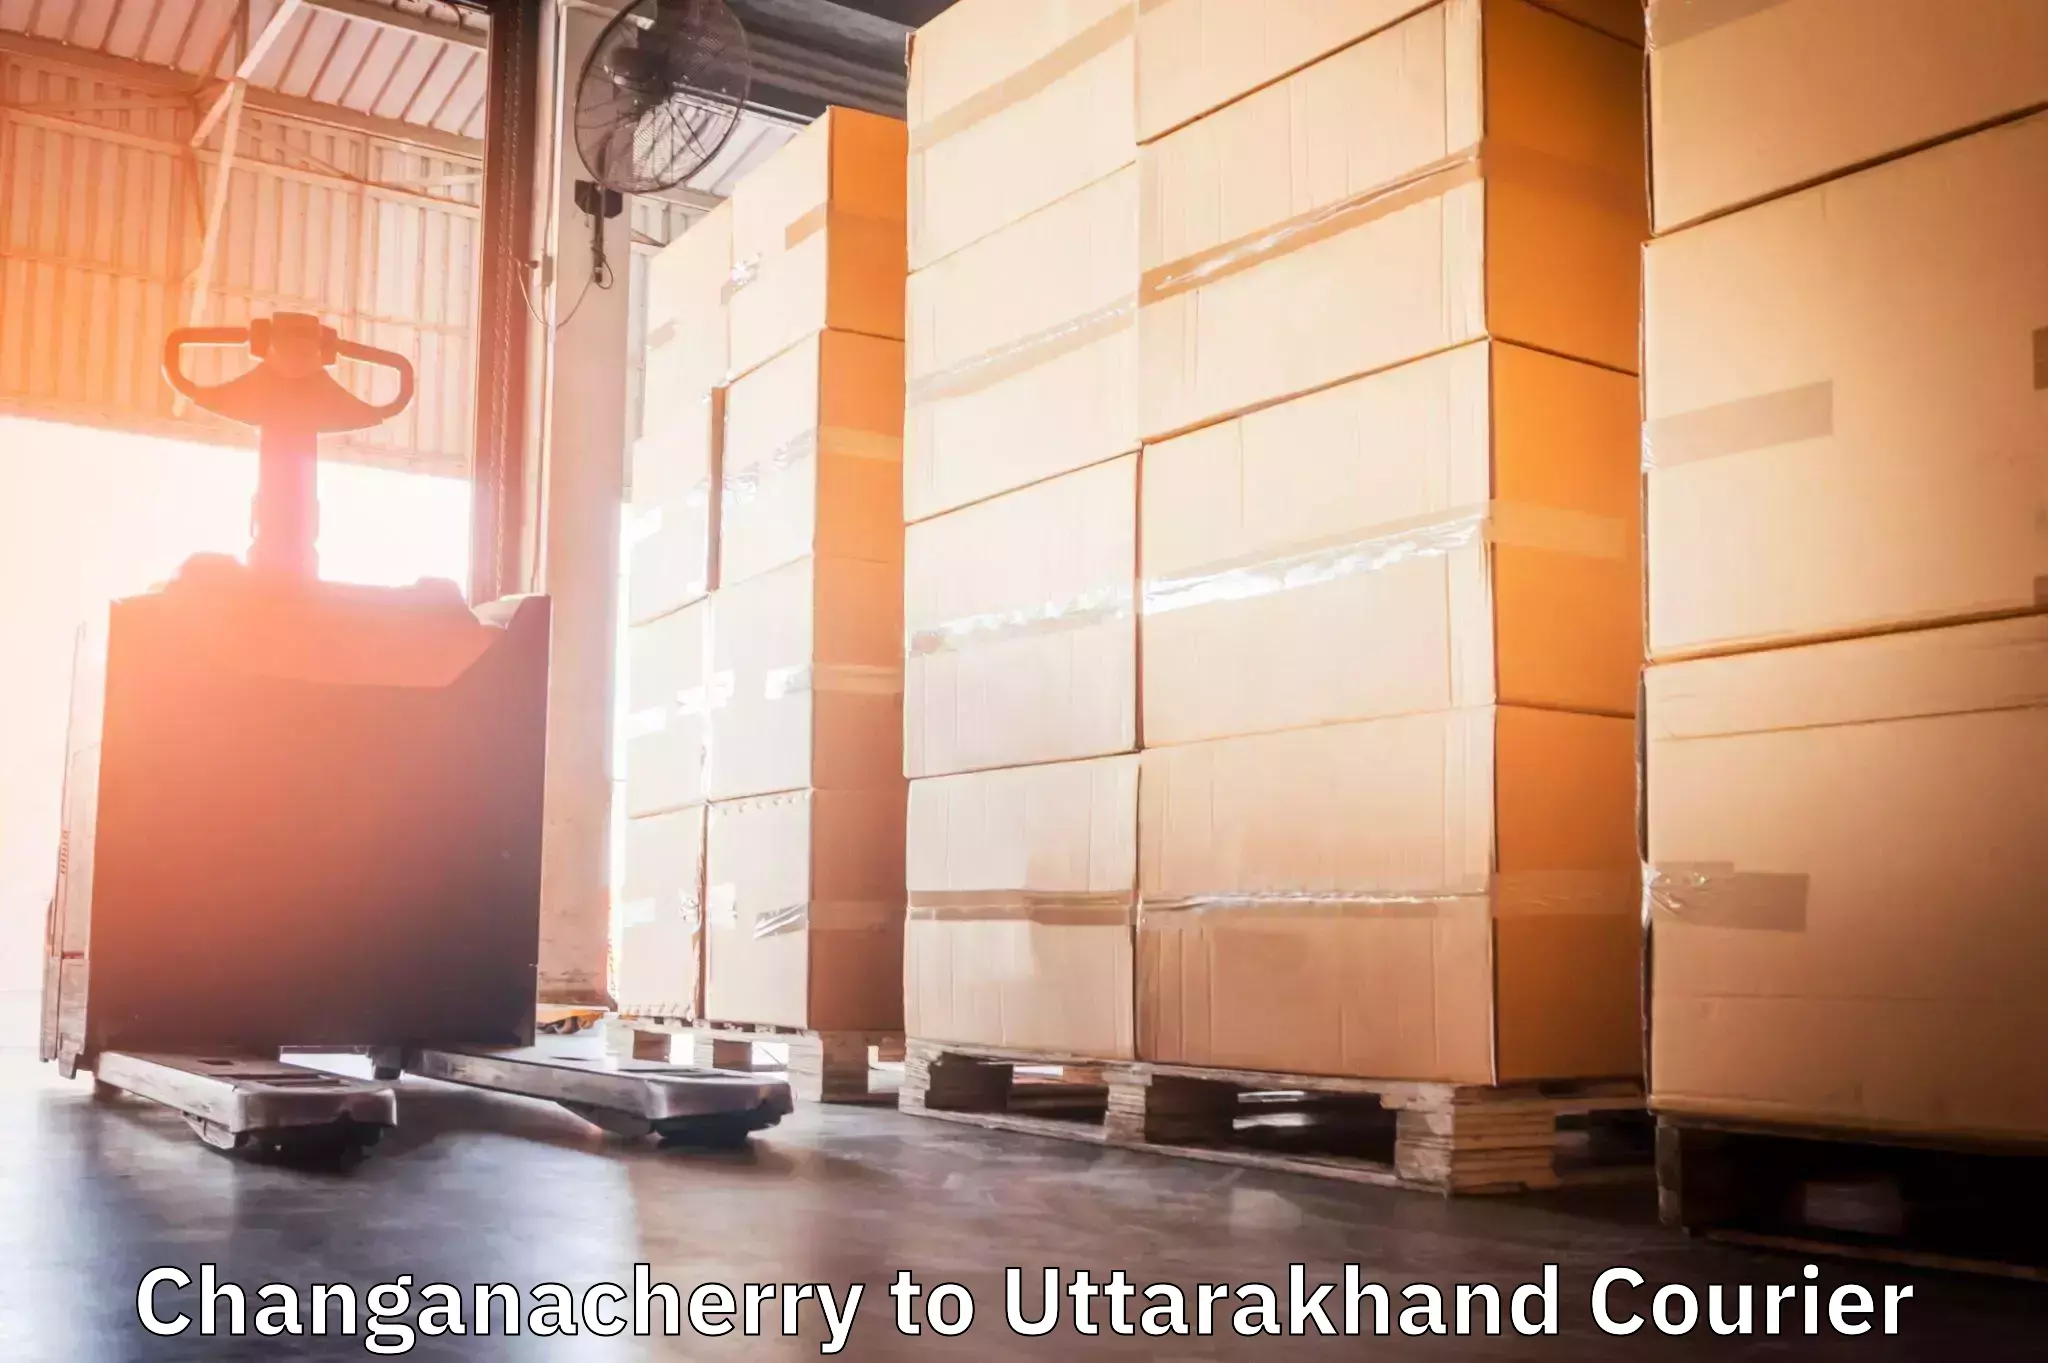 Package delivery network Changanacherry to Pithoragarh